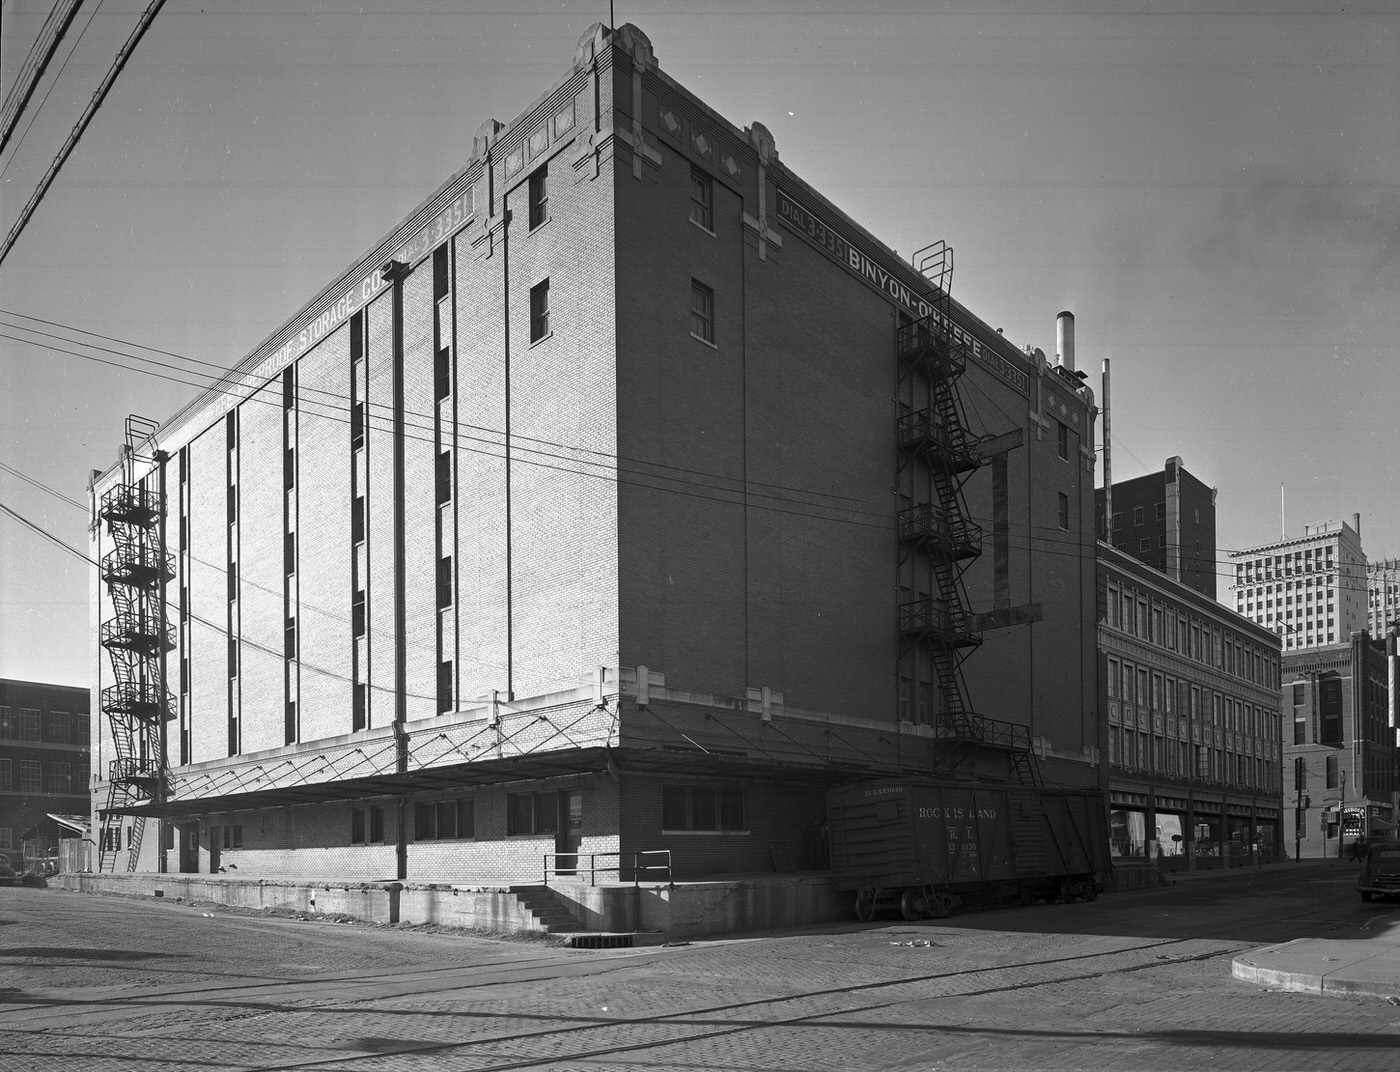 The exterior of Binyon-O'Keefe Storage Company, Fort Worth, Texas, 1942